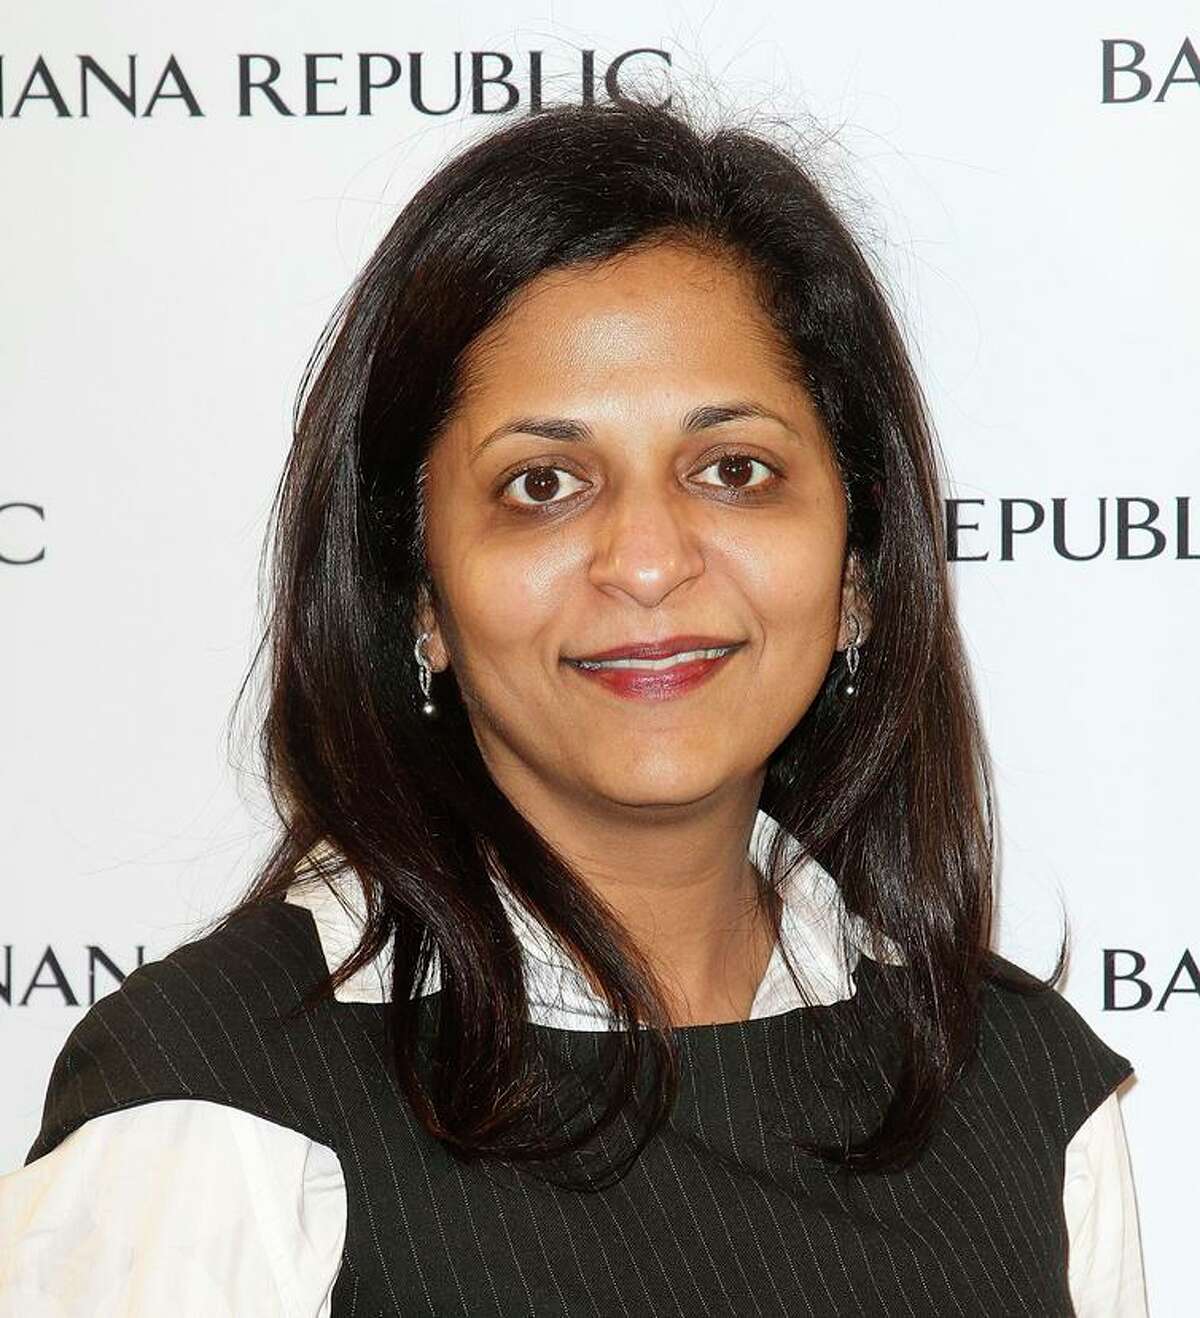 Sonia Syngal is seen in 2011, nine years years prior to her appointment as president and CEO of Gap Inc.